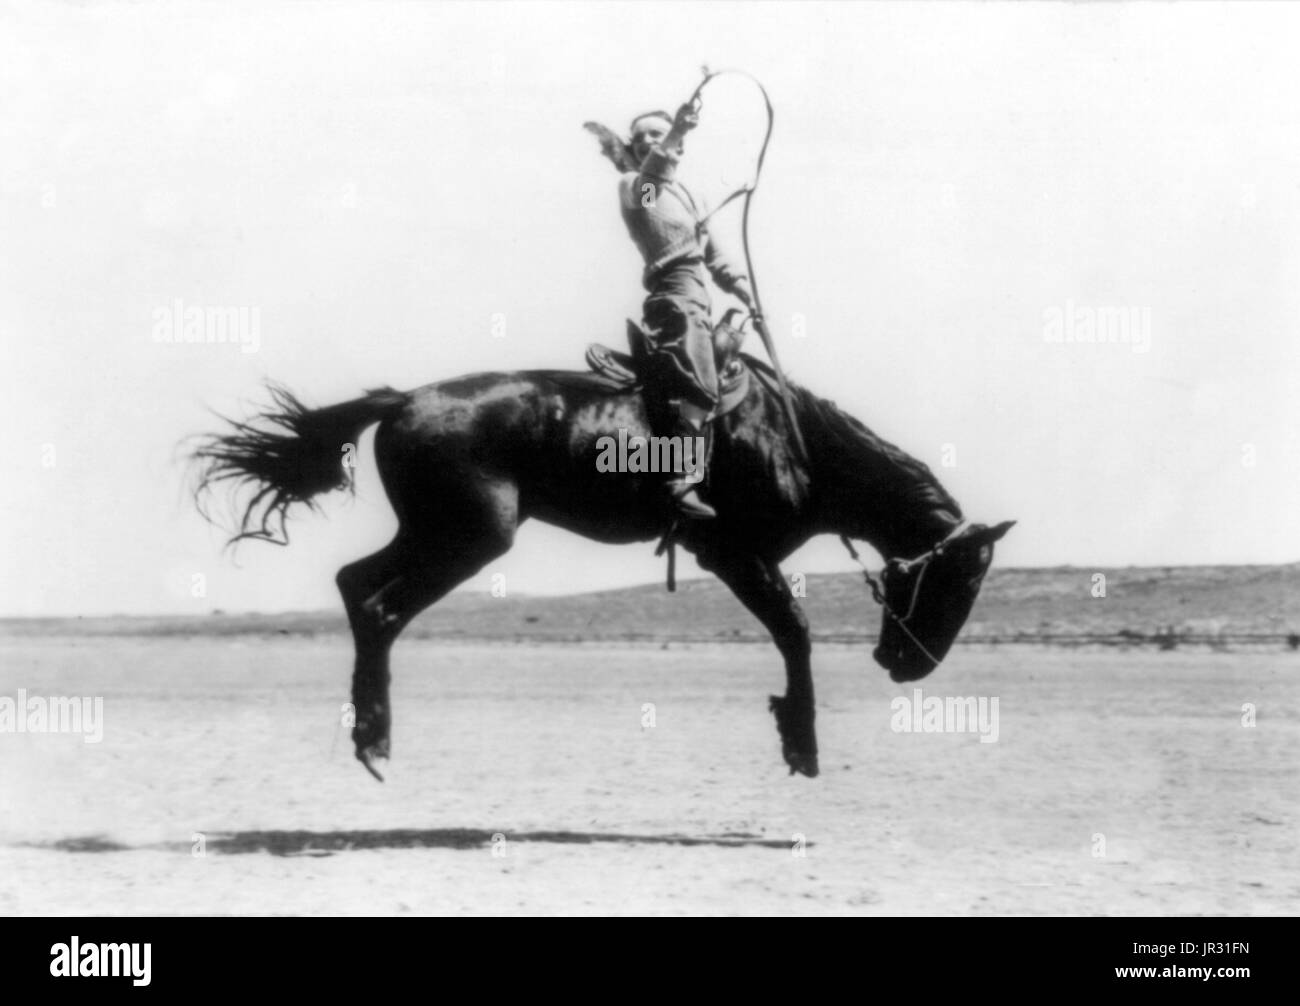 Canutt champion lady rider of the world on Winnemucca, 1919. Kitty Canutt, stage name Kitty Wilks (July 15, 1899 - June 3, 1988), was a professional bronc rider, and the All-Around Champion Cowgirl at the 1916 Pendleton Round-Up in Pendleton, Oregon, for her bucking horse and relay race events. She was known as the 'Diamond Girl' or 'Diamond Kitty' because she had a diamond set in her front tooth. She would occasionally remove and pawn the diamond when she needed contest entry money. Bucking is a movement performed by a horse in which the animal lowers its head and raises its hindquarters into Stock Photo